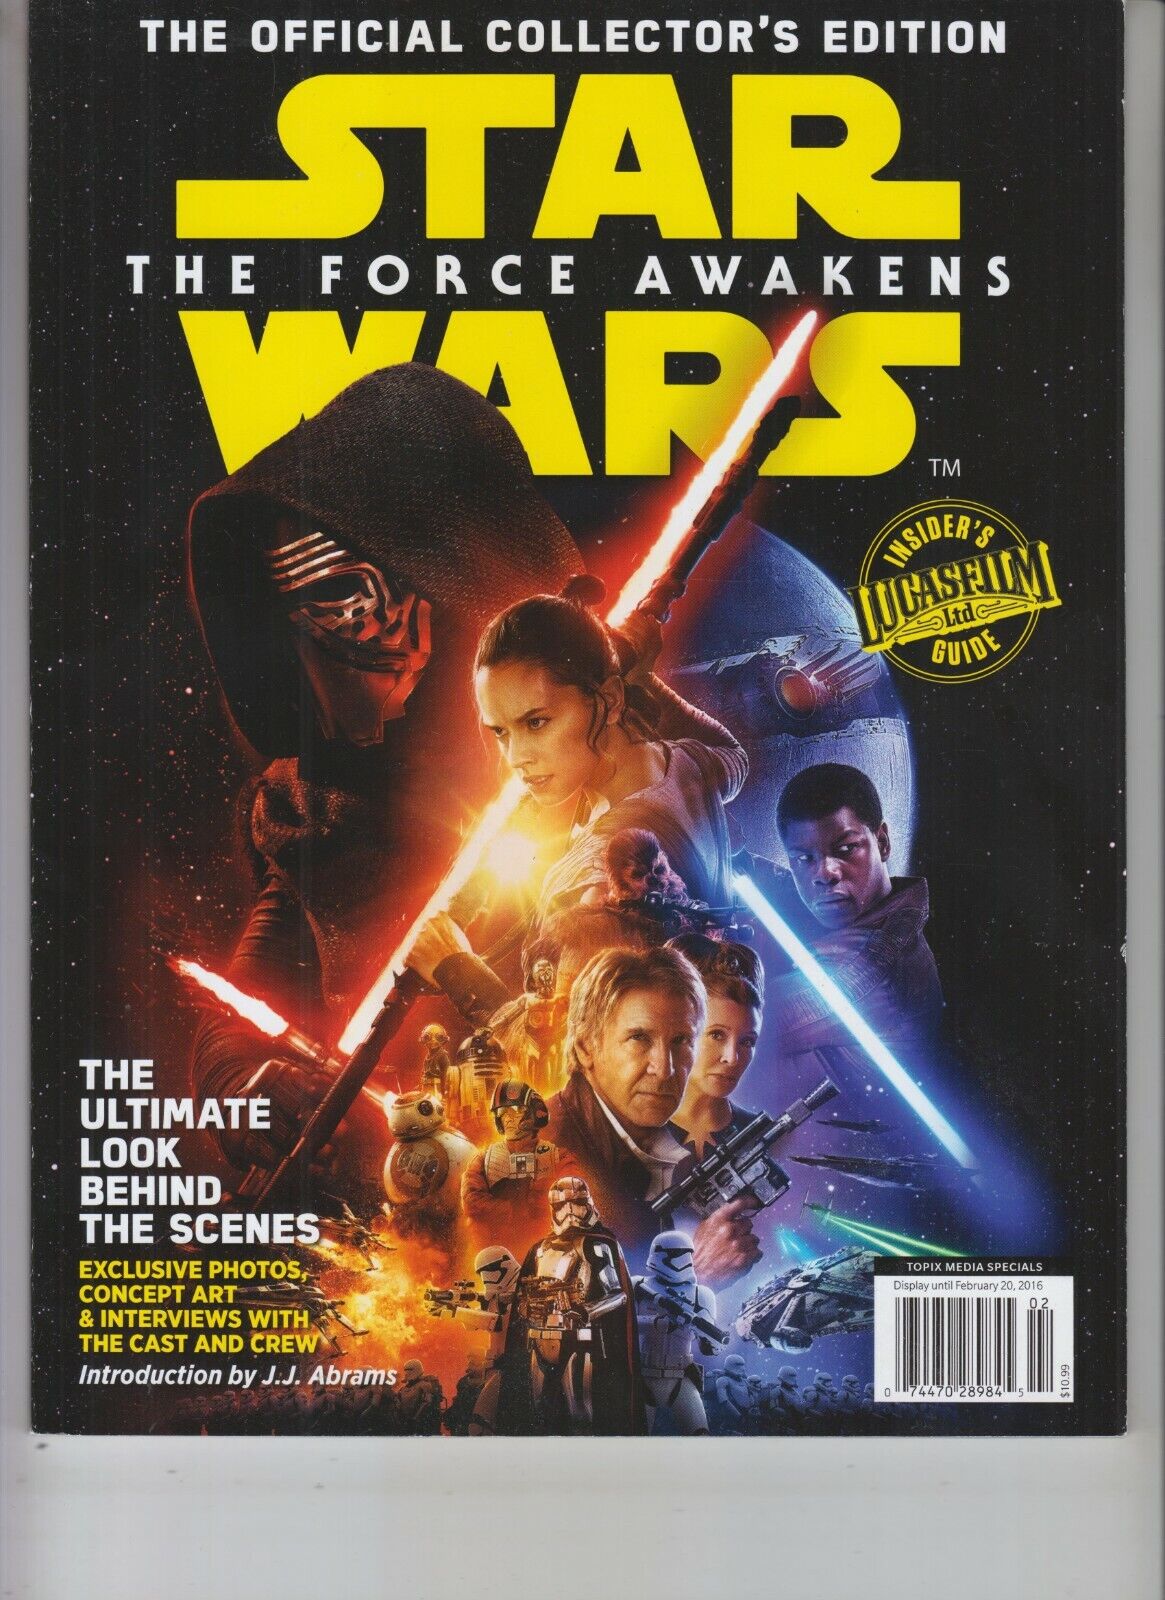 STAR WARS THE FORCE AWAKENS MAGAZINE 2015 OFFICIAL COLLECTOR\'S  ED TOPIX MEDIA